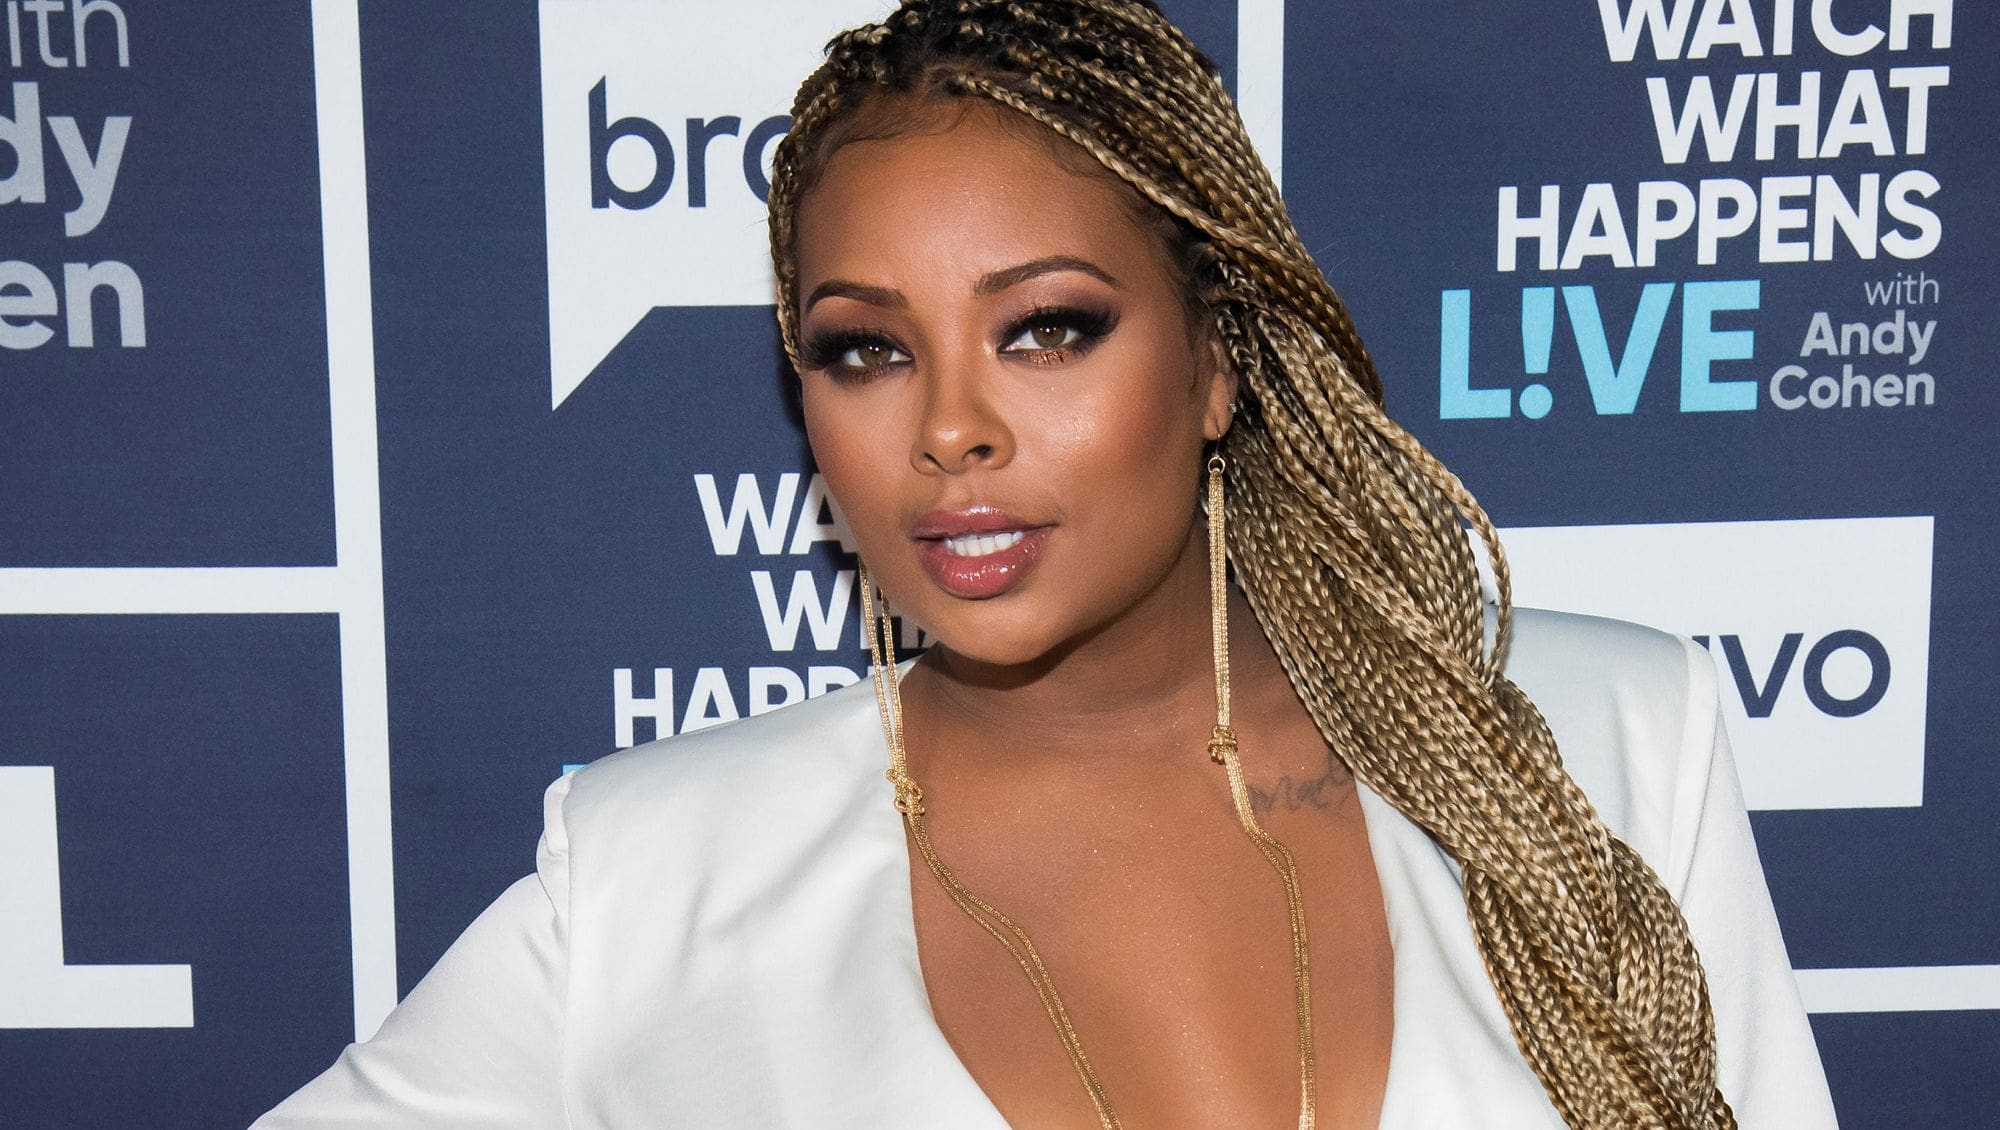 Eva Marcille Shares The Sweetest Video - Her Daughter, Marley Filmed Her: 'She's Documenting The Time On Our Coronacation'